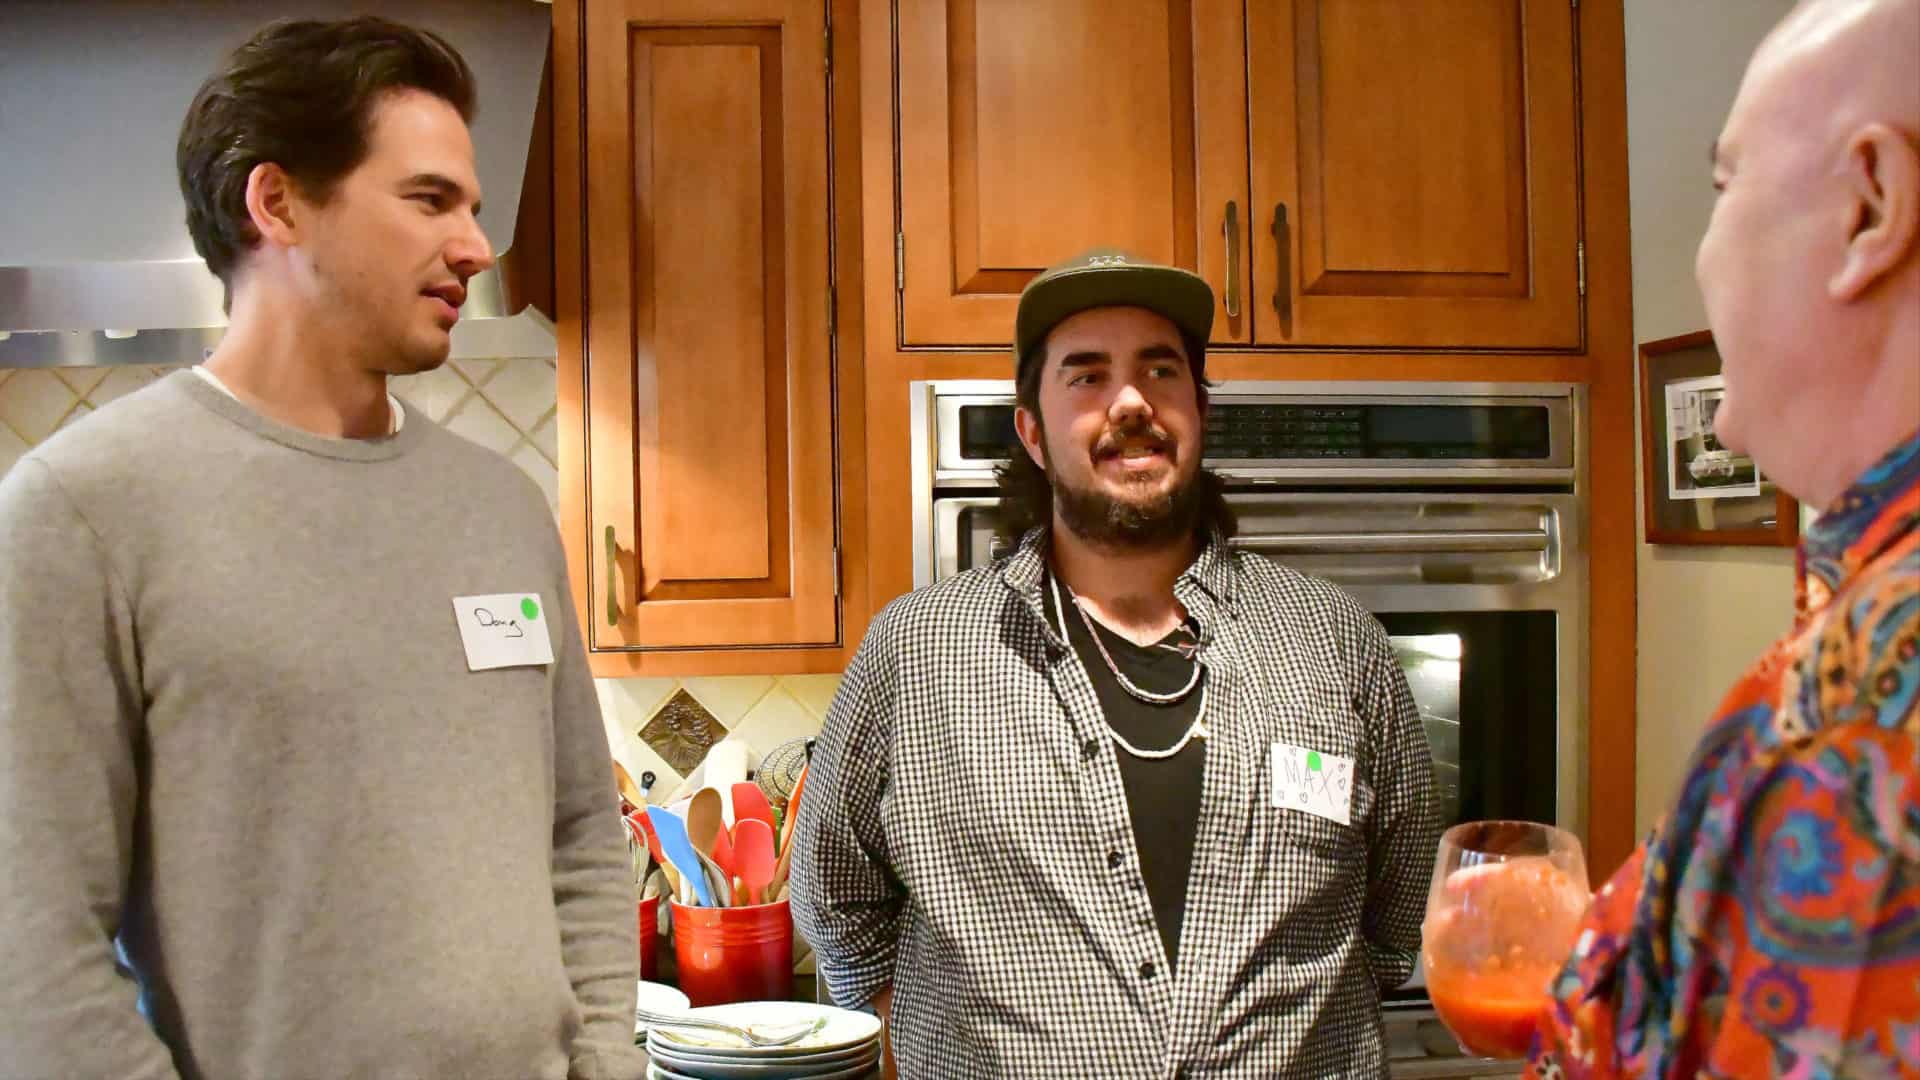 From left, Doug Williams, Max Rivinus and Gregg Farnam share conversation in the kitchen during a potluck in Sheffield for 